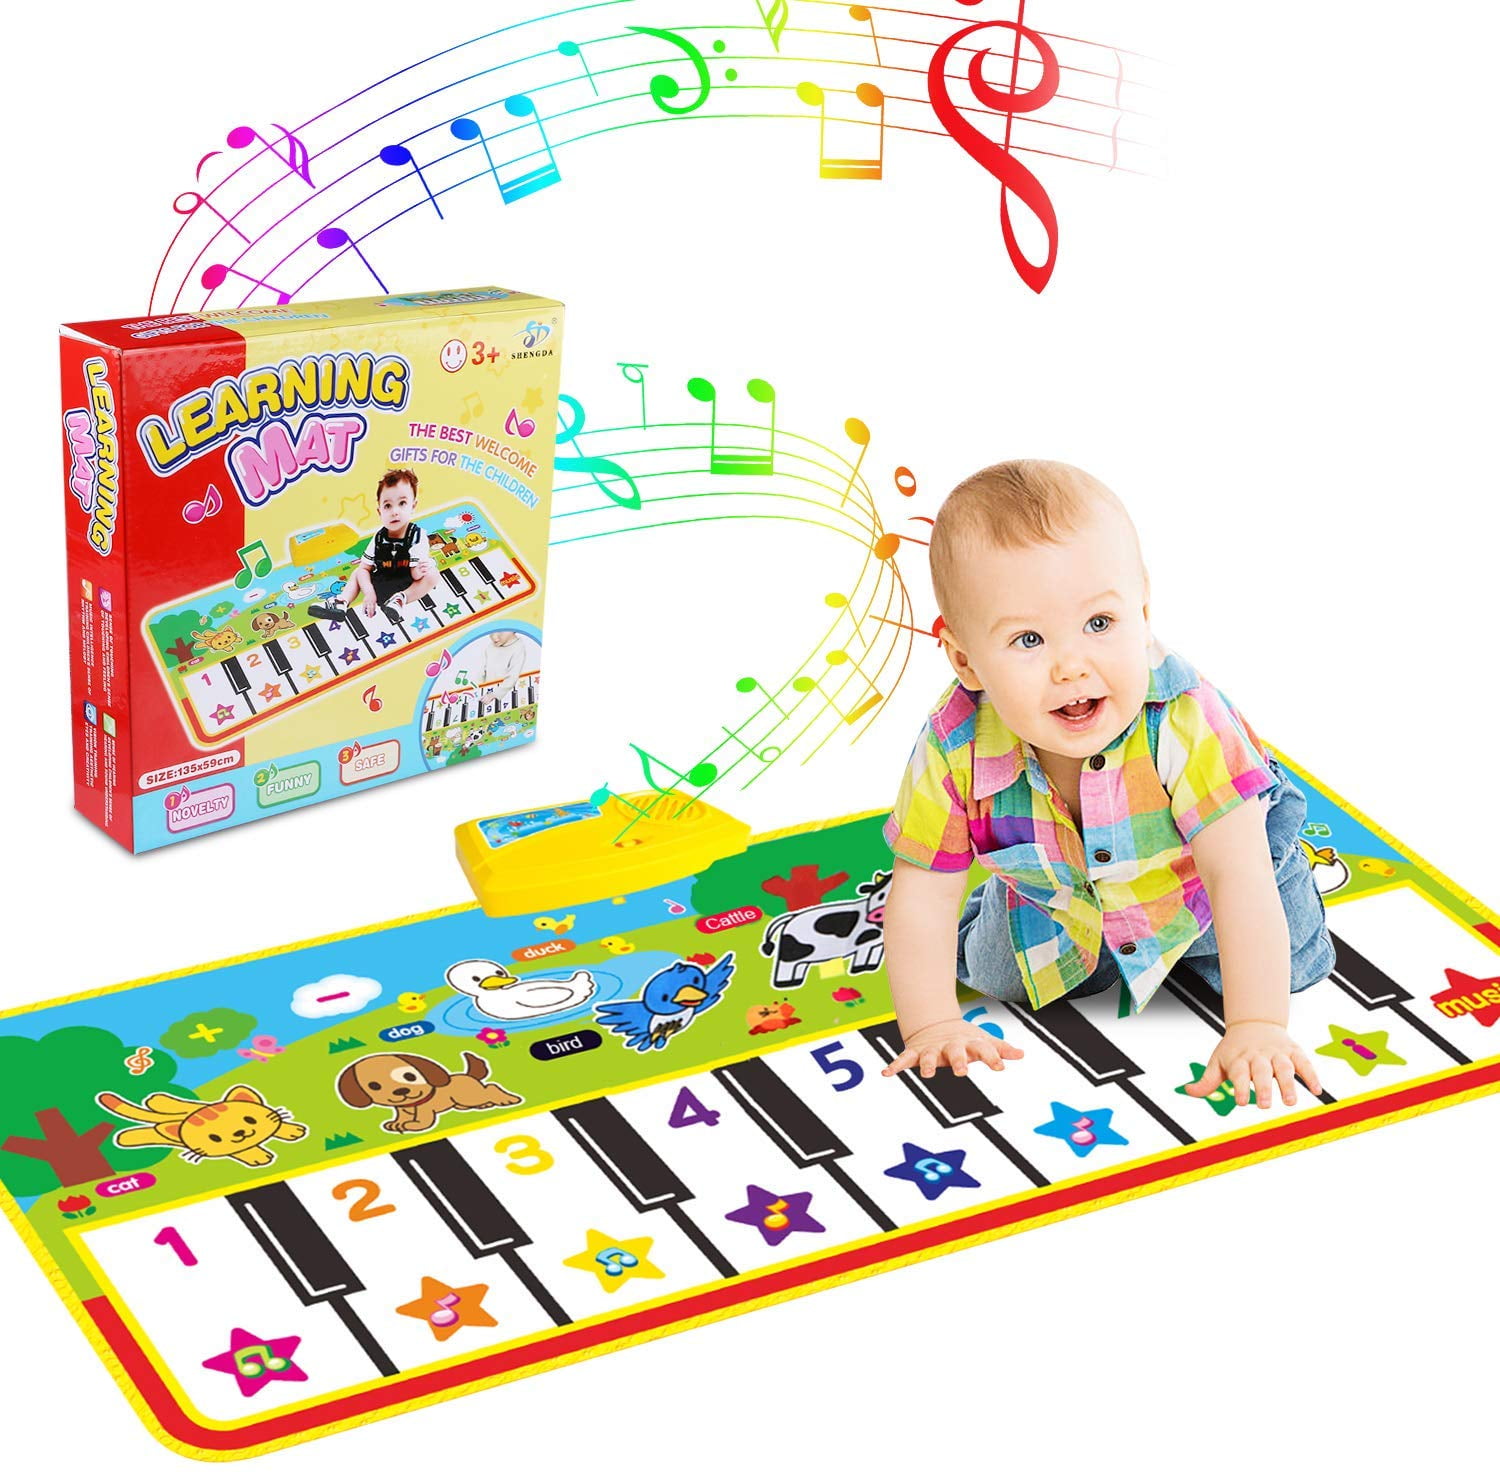 TWFRIC Piano Mats with 38 Sounds Kids Portable Dance Musical Toy Music Floor Piano Touch Play Mat Early Educational Gifts Toys for 1 2 3 4 5 Year Old Girls Boys Toddlers 